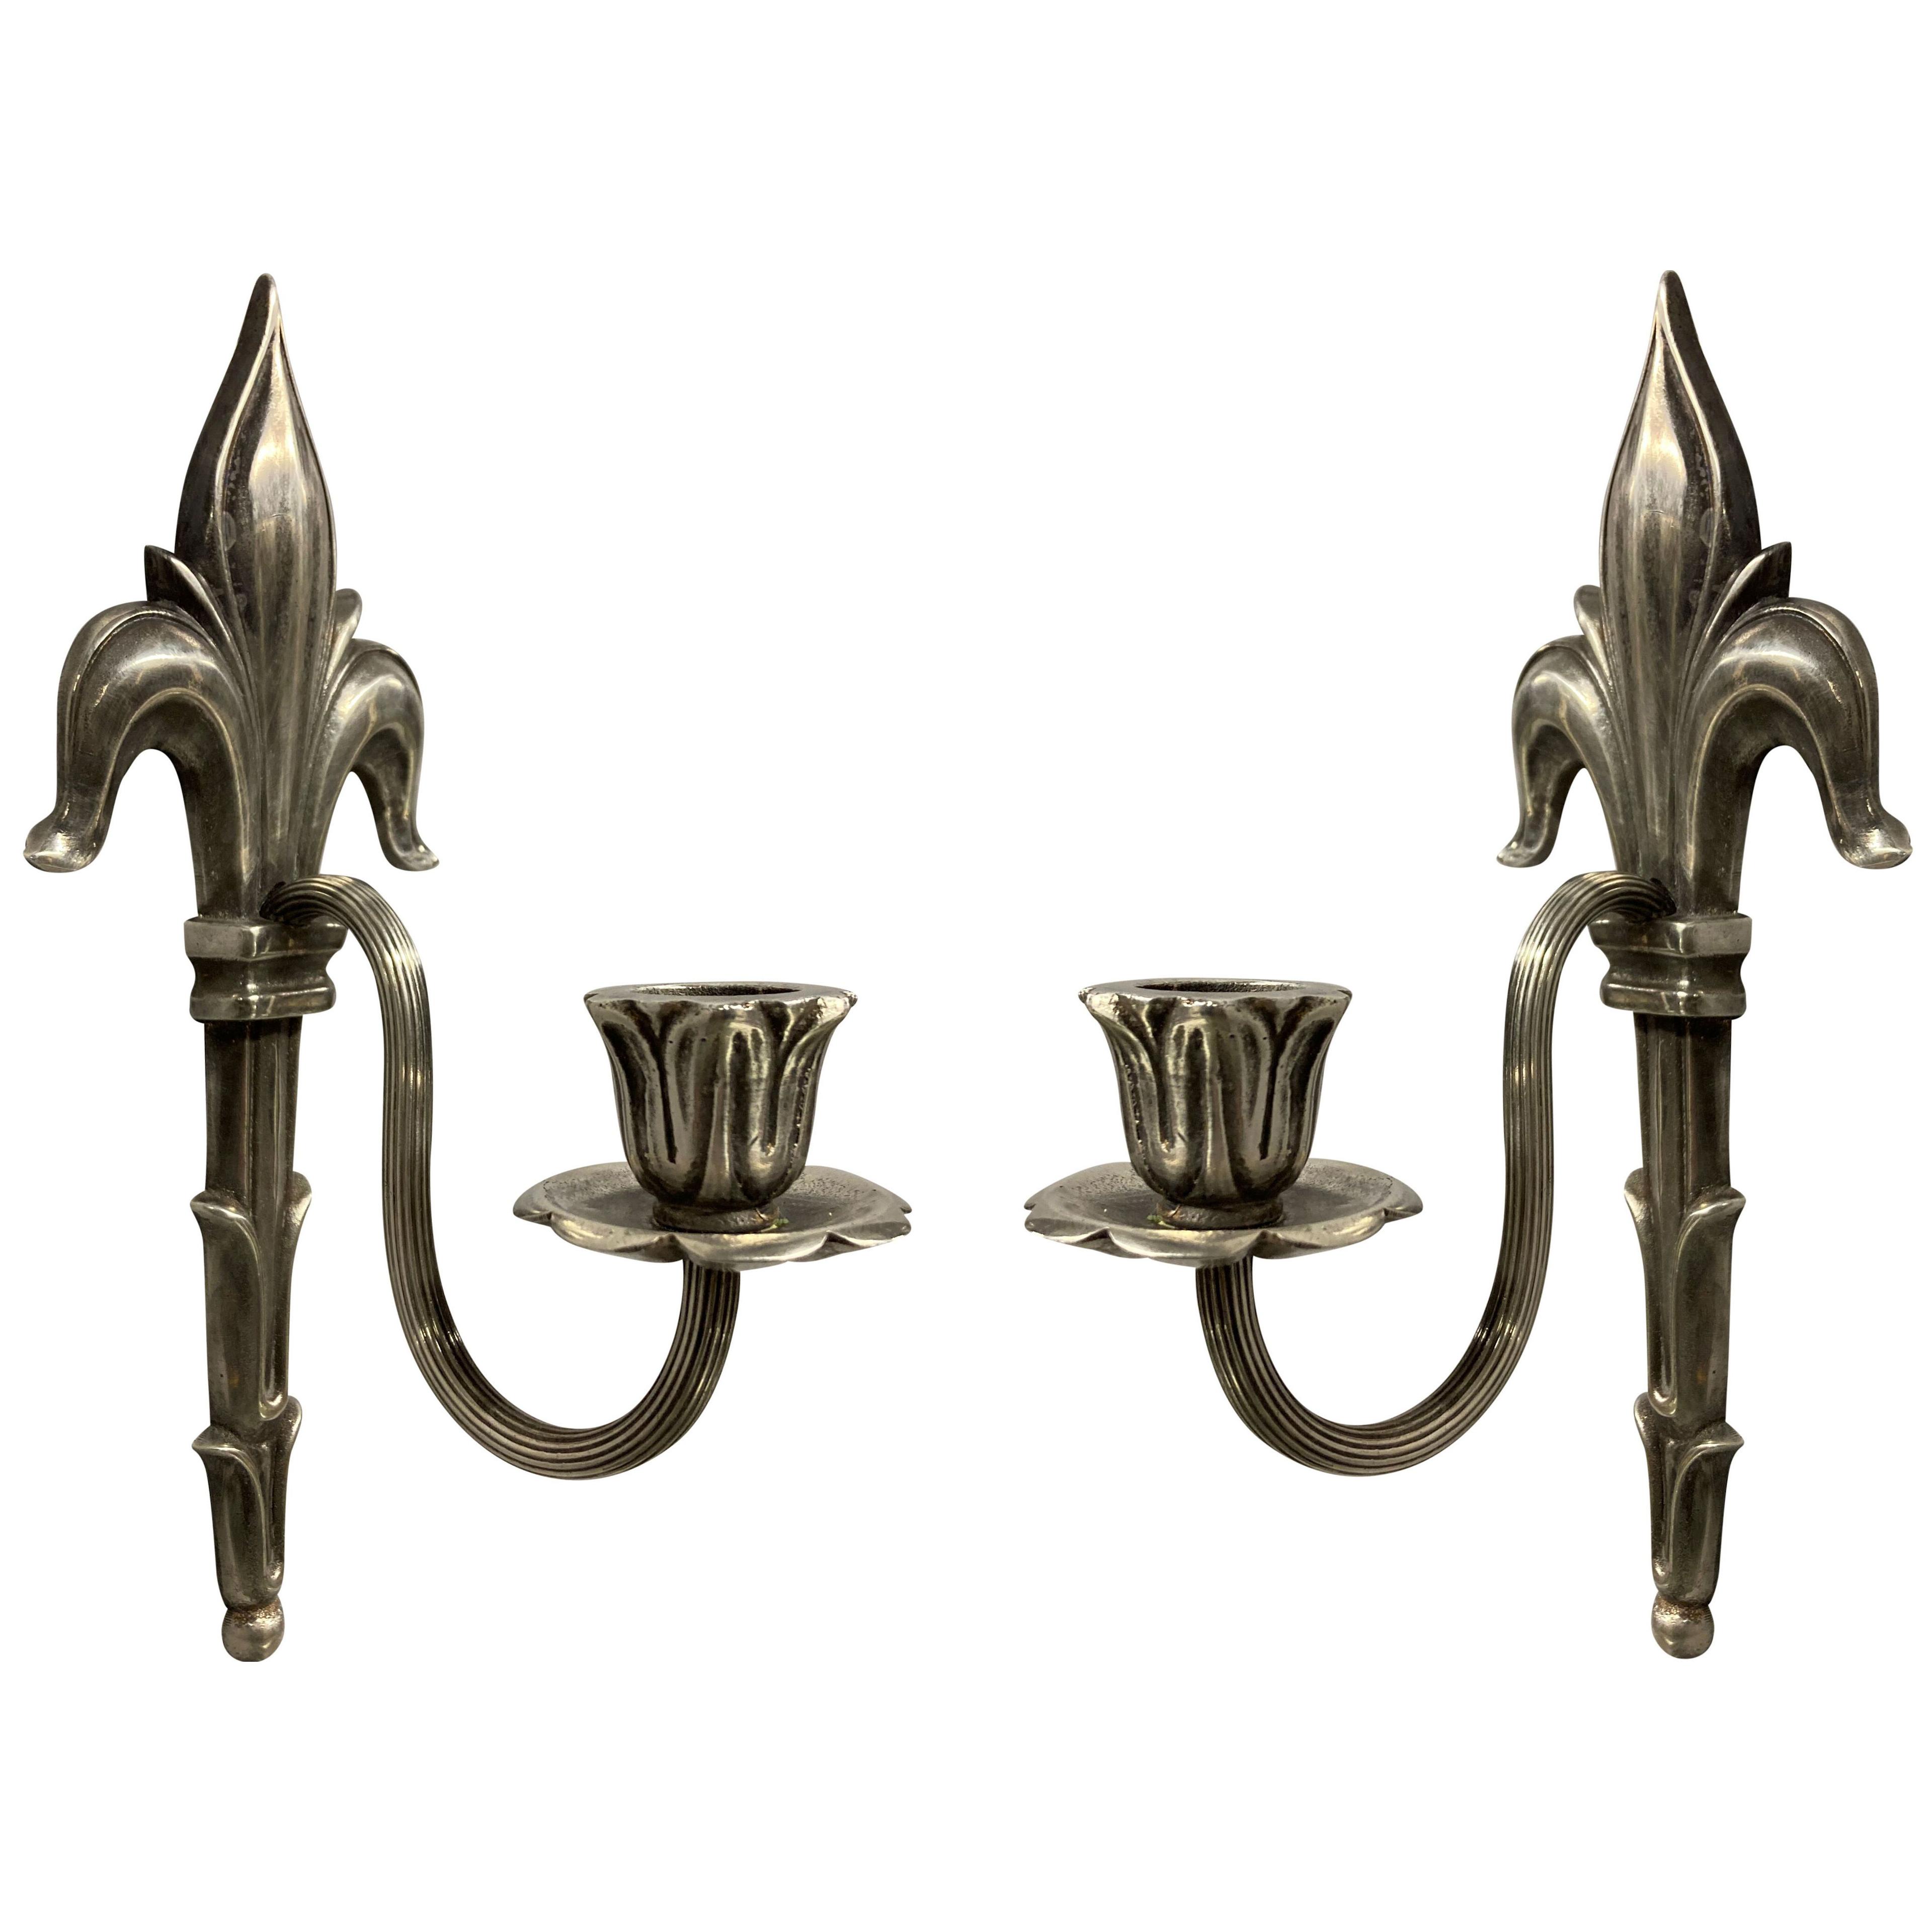 A PAIR OF EDWARDIAN SILVER PLATED SINGLE ARM SCONCES